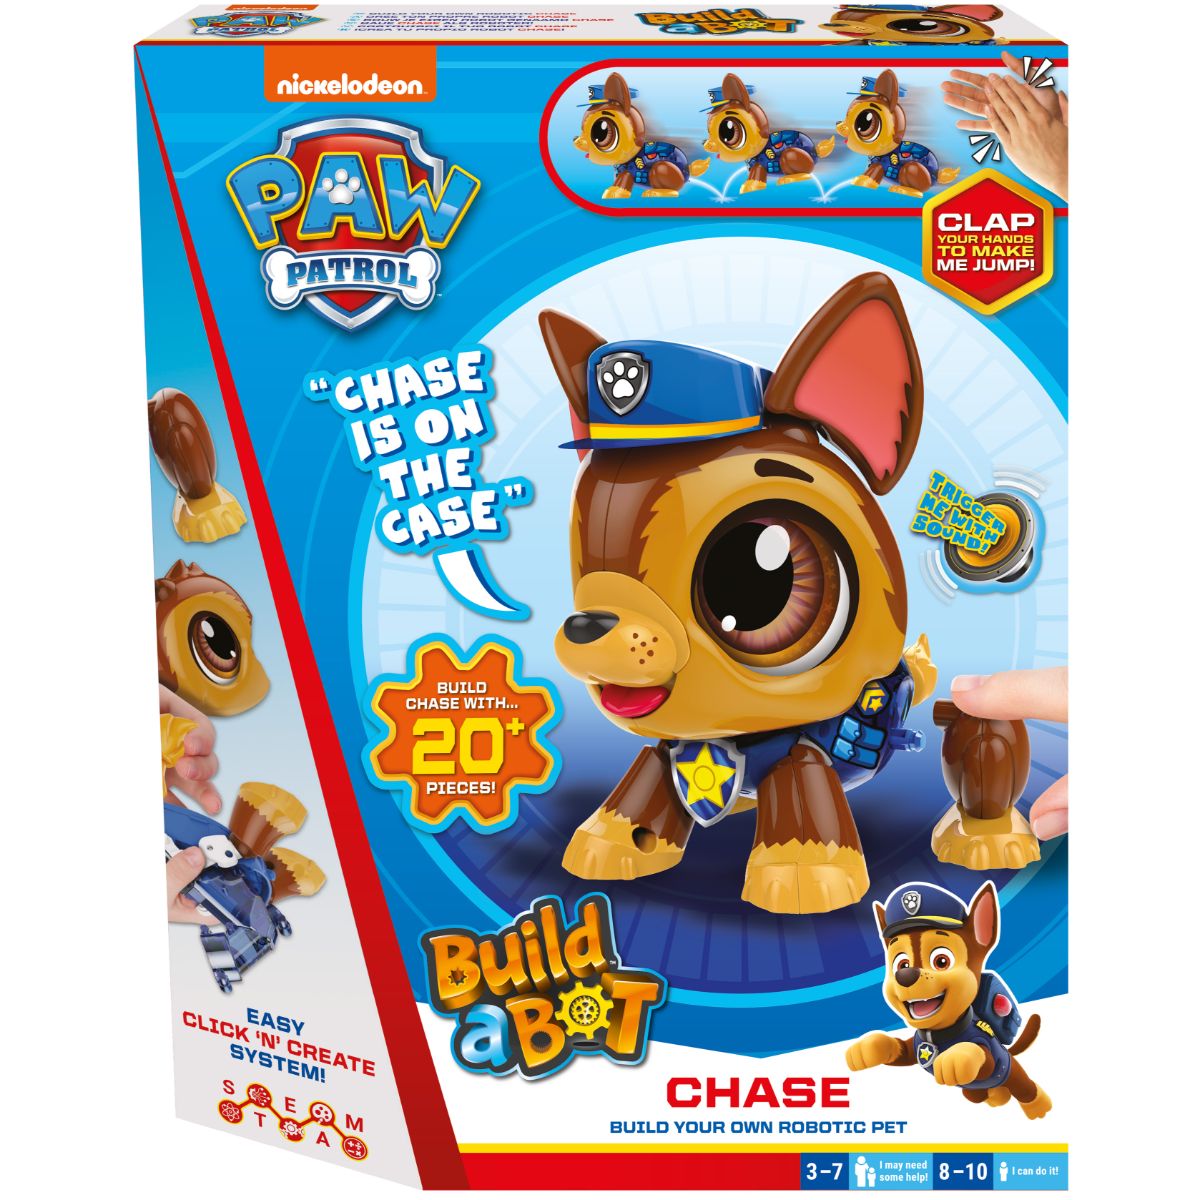 Robot Paw Patrol Build a Bot, Chase, 20 piese